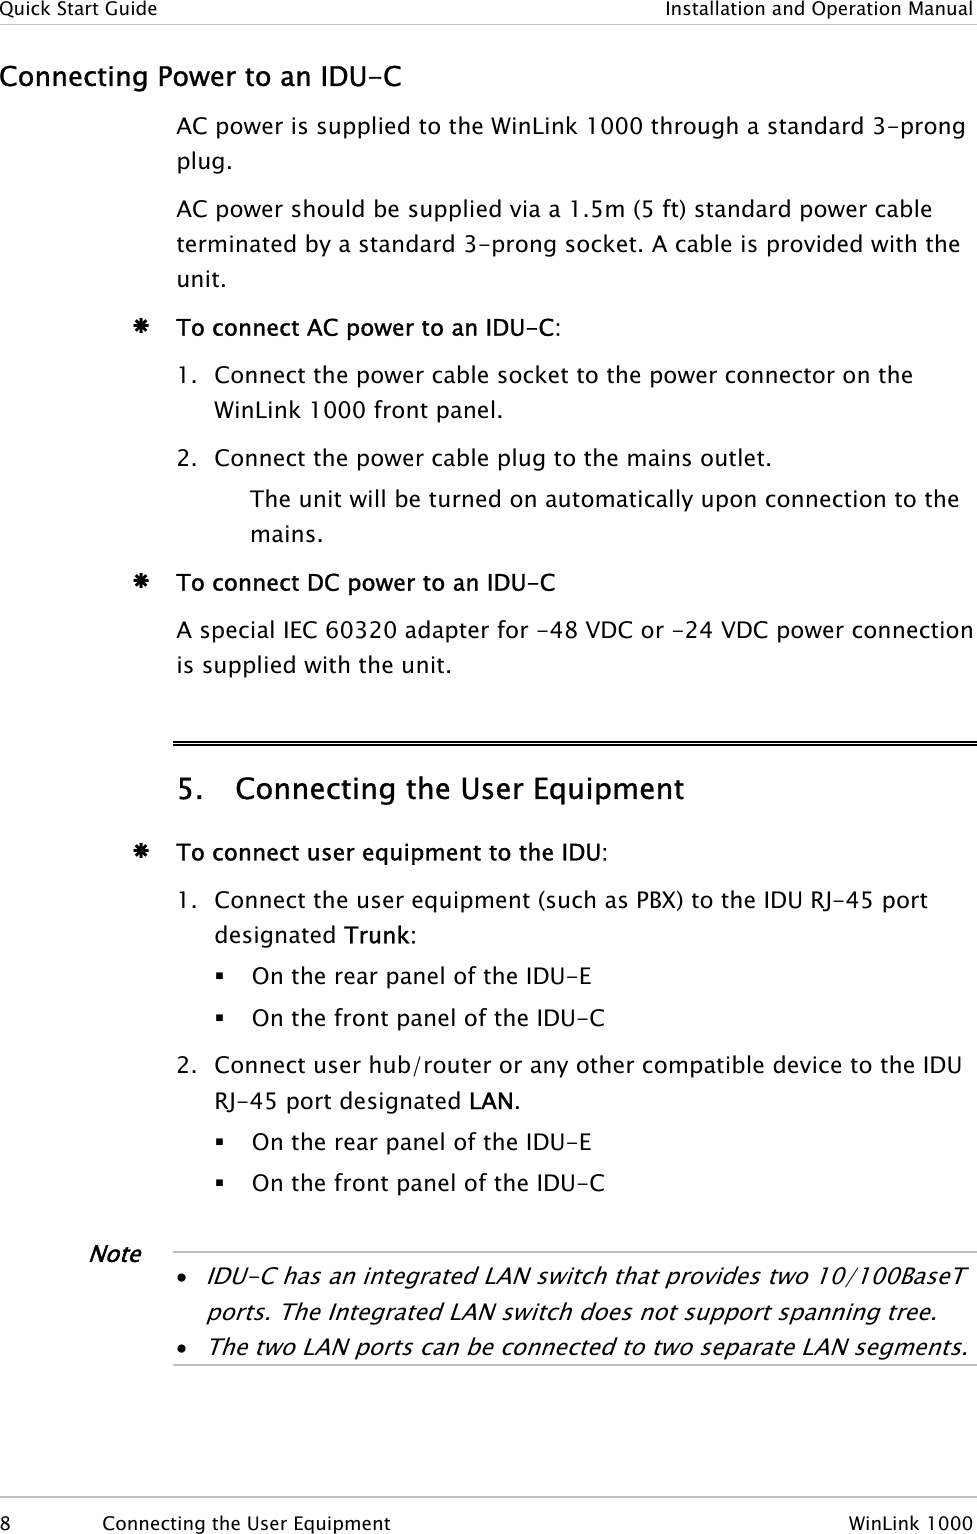 Quick Start Guide  Installation and Operation Manual Connecting Power to an IDU-C AC power is supplied to the WinLink 1000 through a standard 3-prong plug.  AC power should be supplied via a 1.5m (5 ft) standard power cable terminated by a standard 3-prong socket. A cable is provided with the unit. Æ To connect AC power to an IDU-C: 1. Connect the power cable socket to the power connector on the WinLink 1000 front panel. 2. Connect the power cable plug to the mains outlet. The unit will be turned on automatically upon connection to the mains. Æ To connect DC power to an IDU-C A special IEC 60320 adapter for -48 VDC or -24 VDC power connection is supplied with the unit.  5. Connecting the User Equipment Æ To connect user equipment to the IDU: 1. Connect the user equipment (such as PBX) to the IDU RJ-45 port designated Trunk:  On the rear panel of the IDU-E  On the front panel of the IDU-C 2. Connect user hub/router or any other compatible device to the IDU RJ-45 port designated LAN.  On the rear panel of the IDU-E  On the front panel of the IDU-C   Note • IDU-C has an integrated LAN switch that provides two 10/100BaseT ports. The Integrated LAN switch does not support spanning tree. • The two LAN por s can be connected to two separate LAN segments. t  8  Connecting the User Equipment  WinLink 1000 